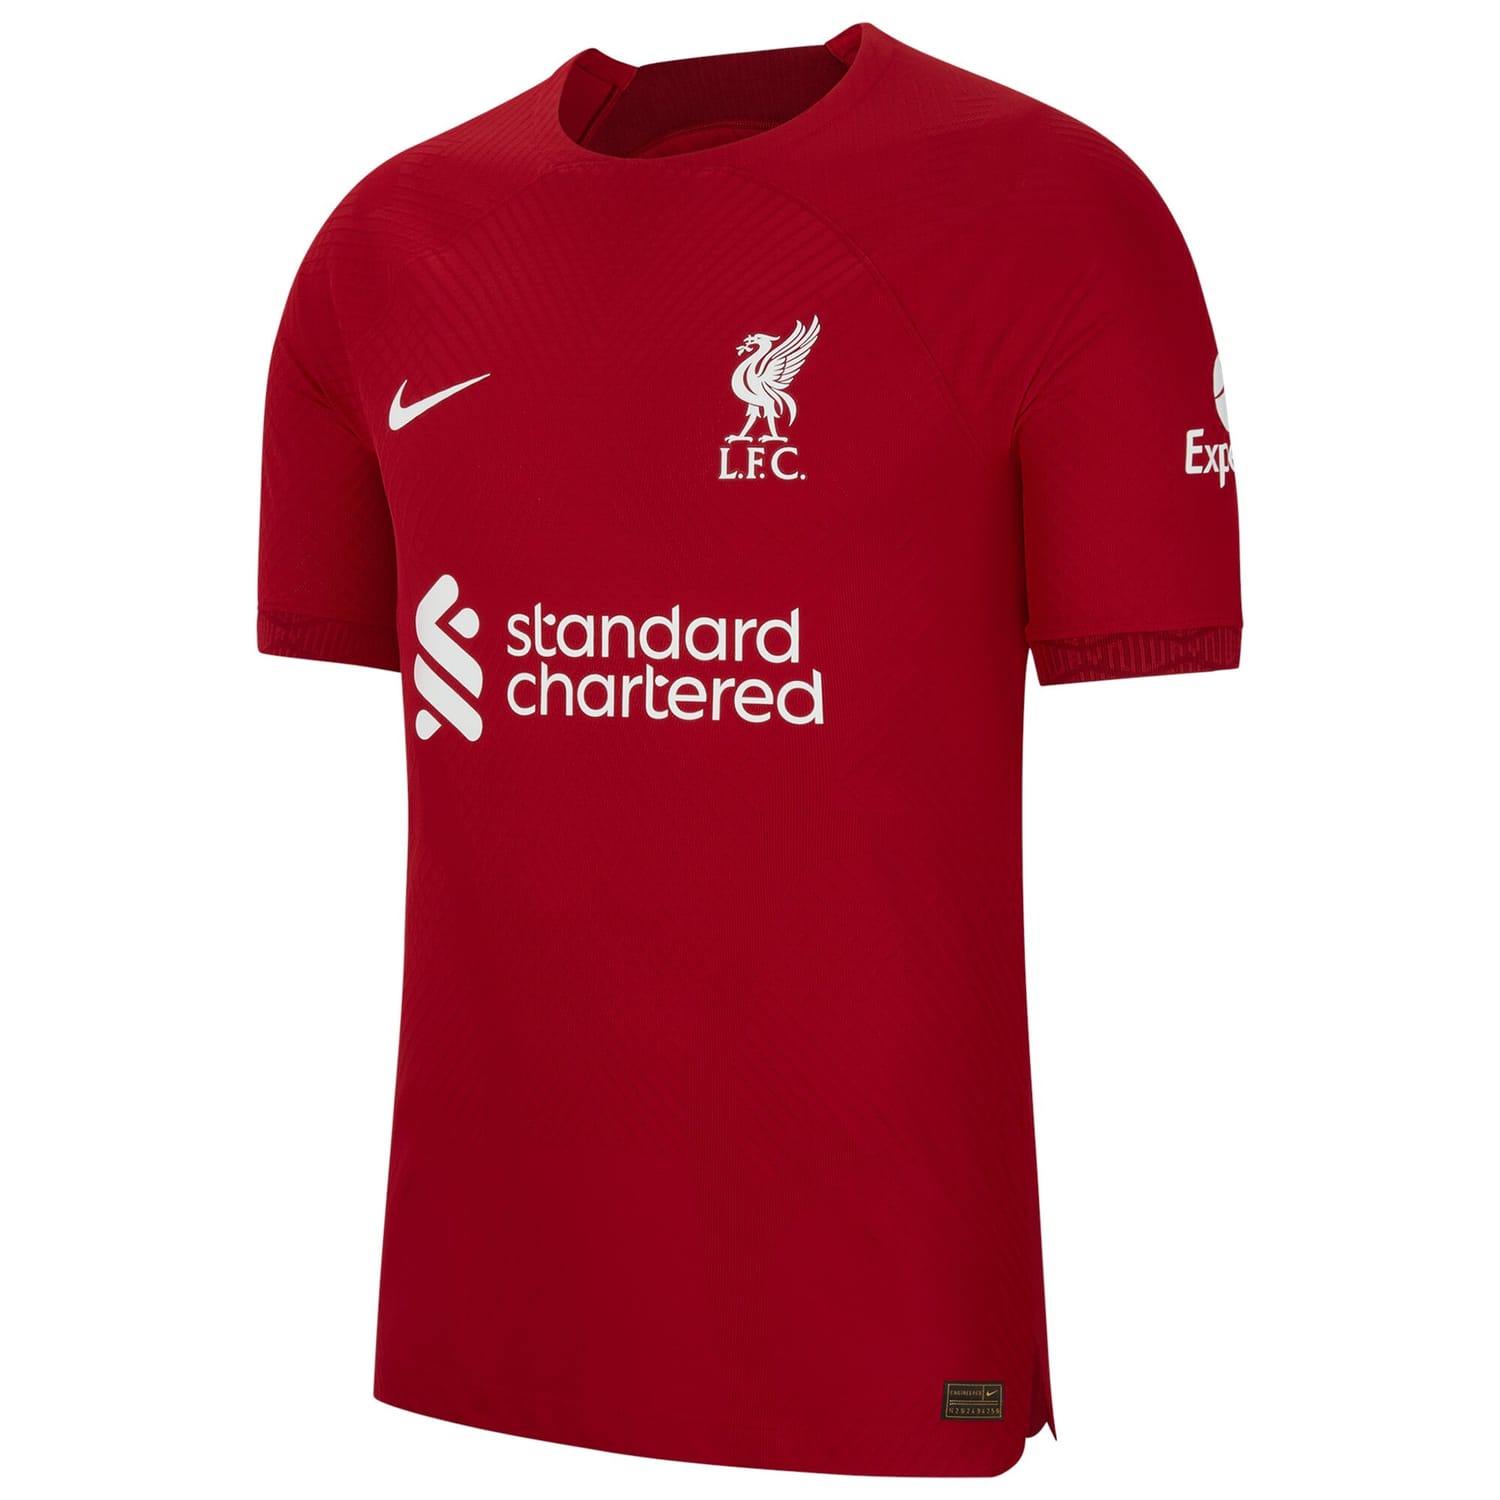 Premier League Liverpool Home Authentic Jersey Shirt 2022-23 player Milner 7 printing for Men